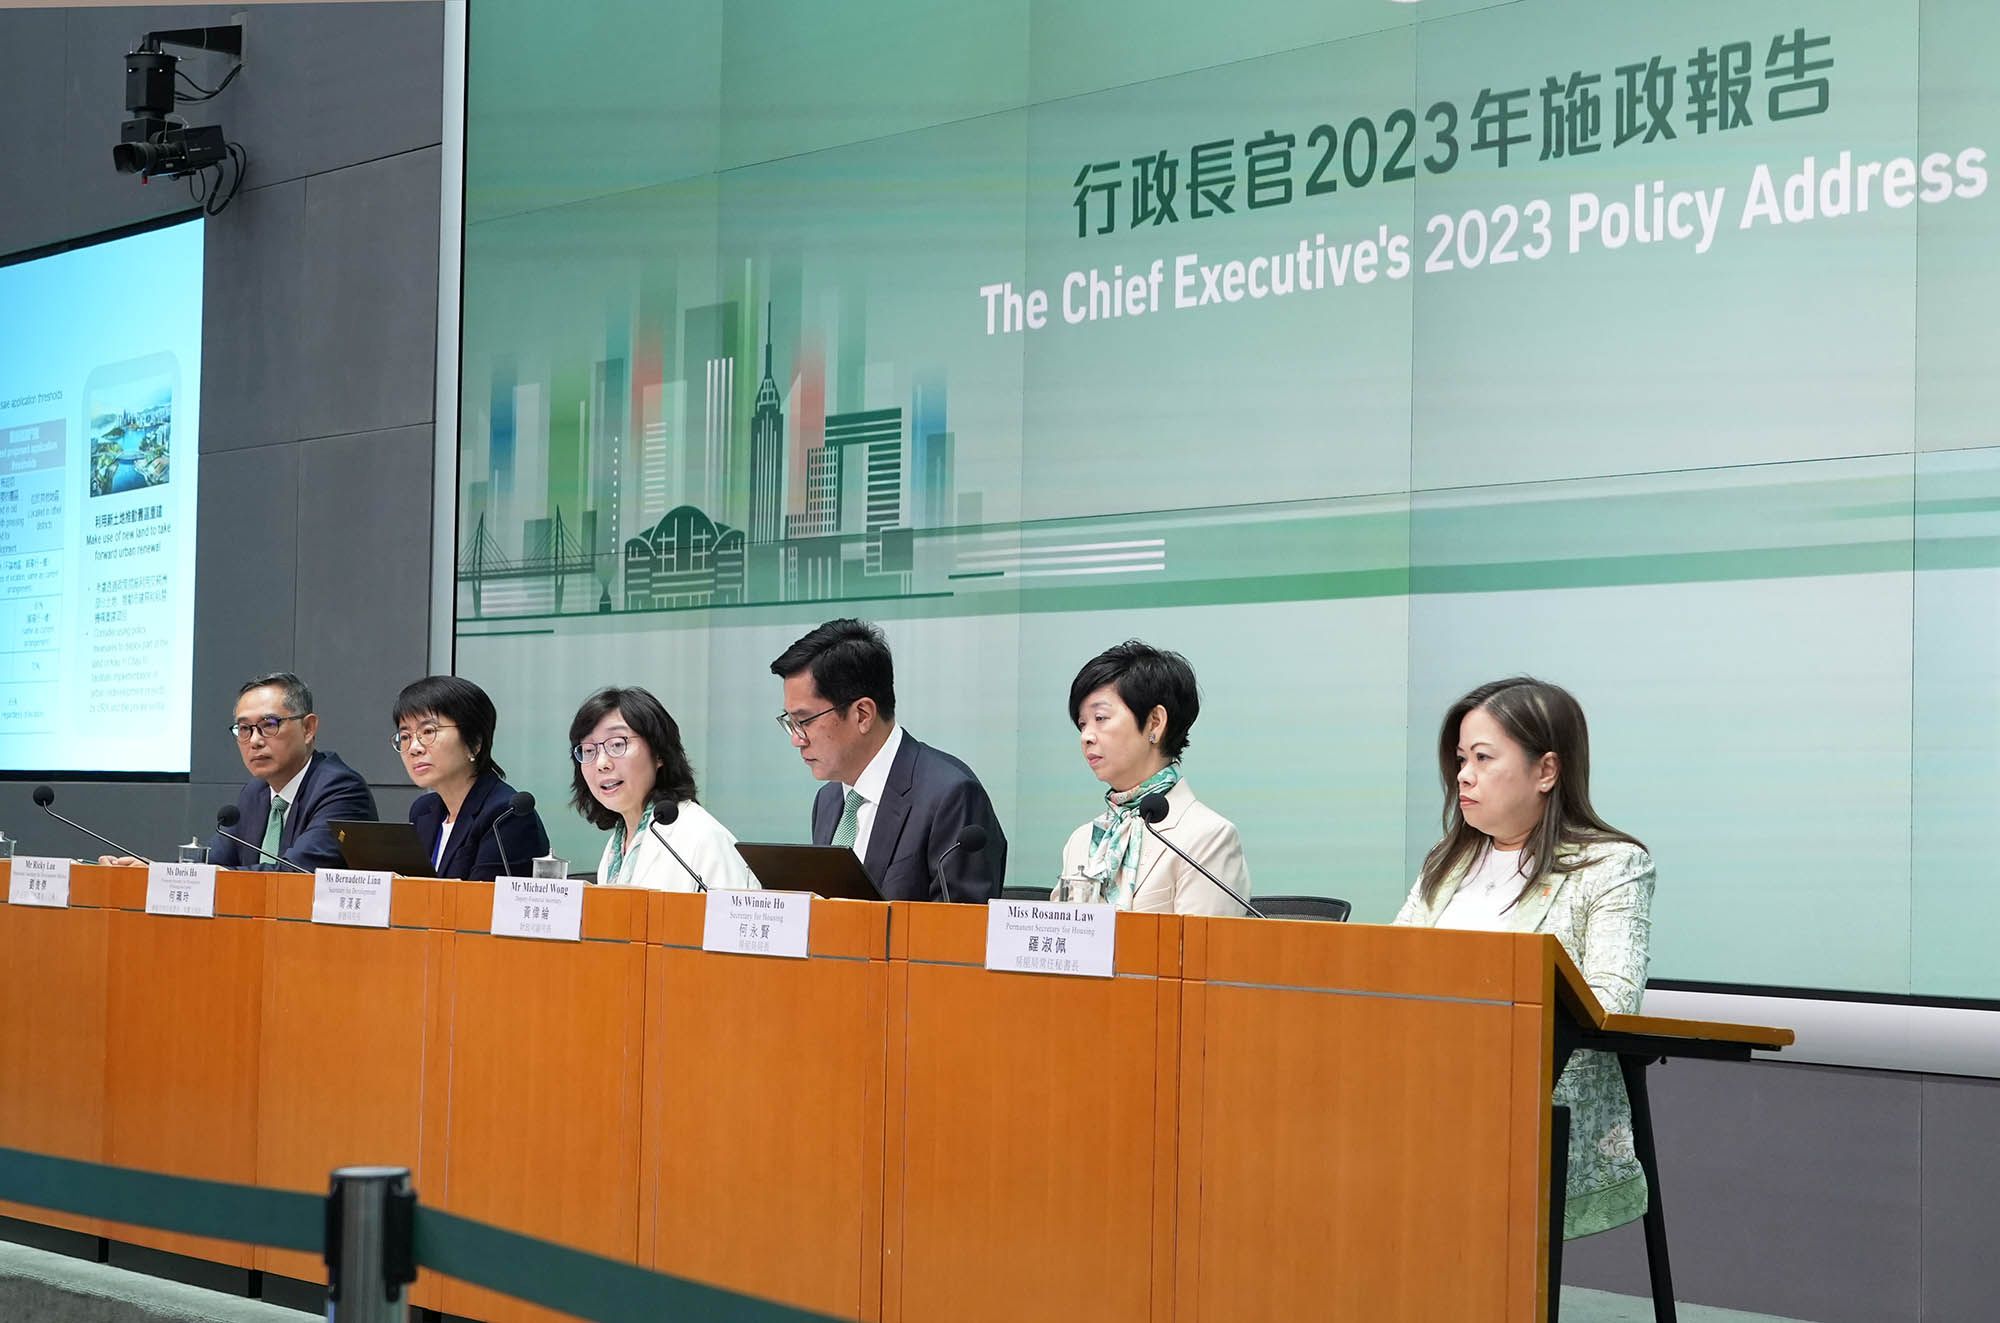 The Government held a press conference recently to elaborate on the initiatives related to land and housing in the Chief Executive’s 2023 Policy Address.